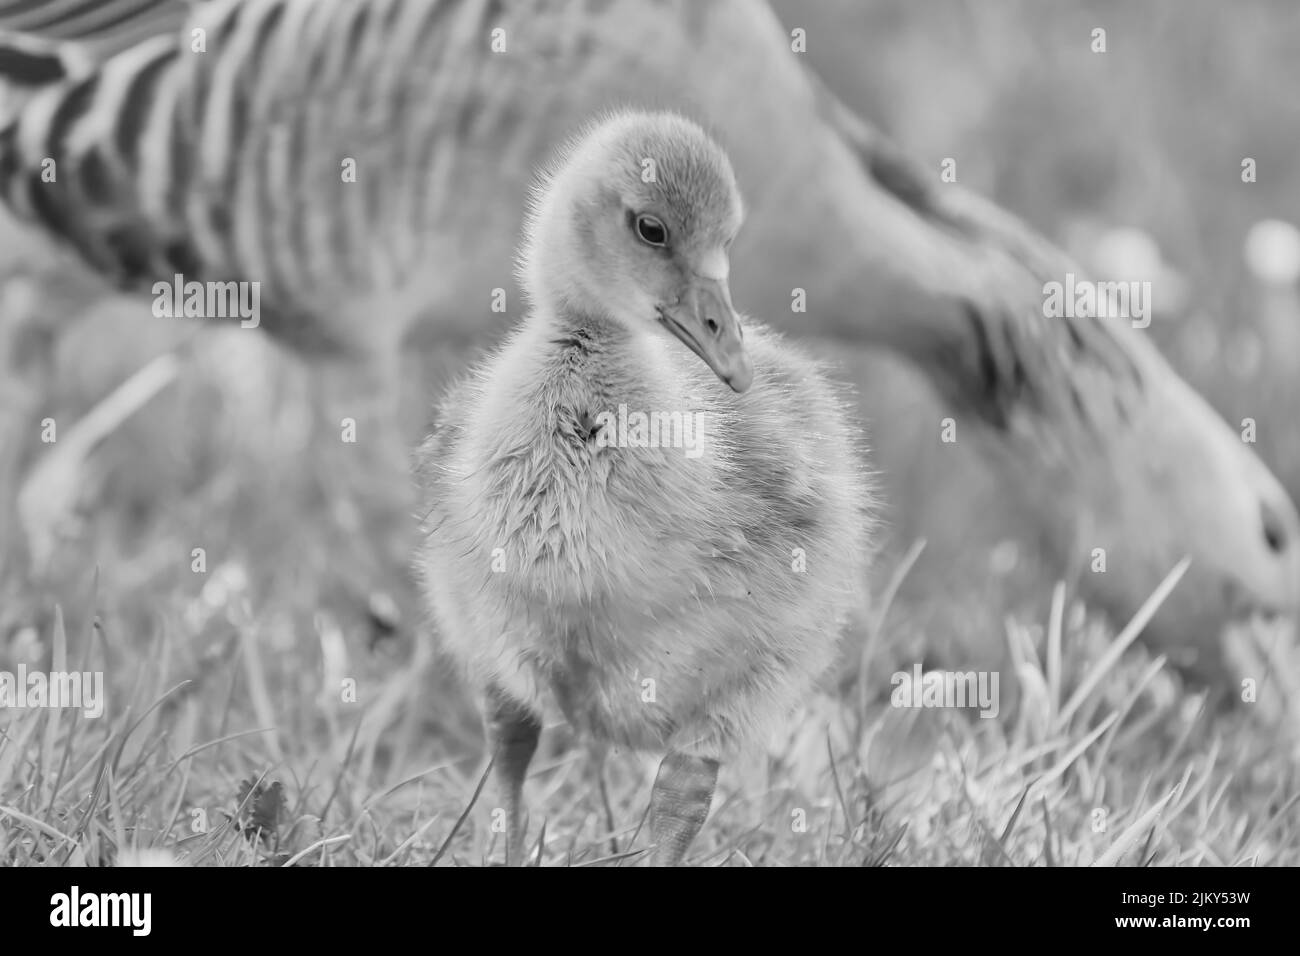 A grayscale shot of a young gosling foraging on a field against a blurry adult goose background Stock Photo